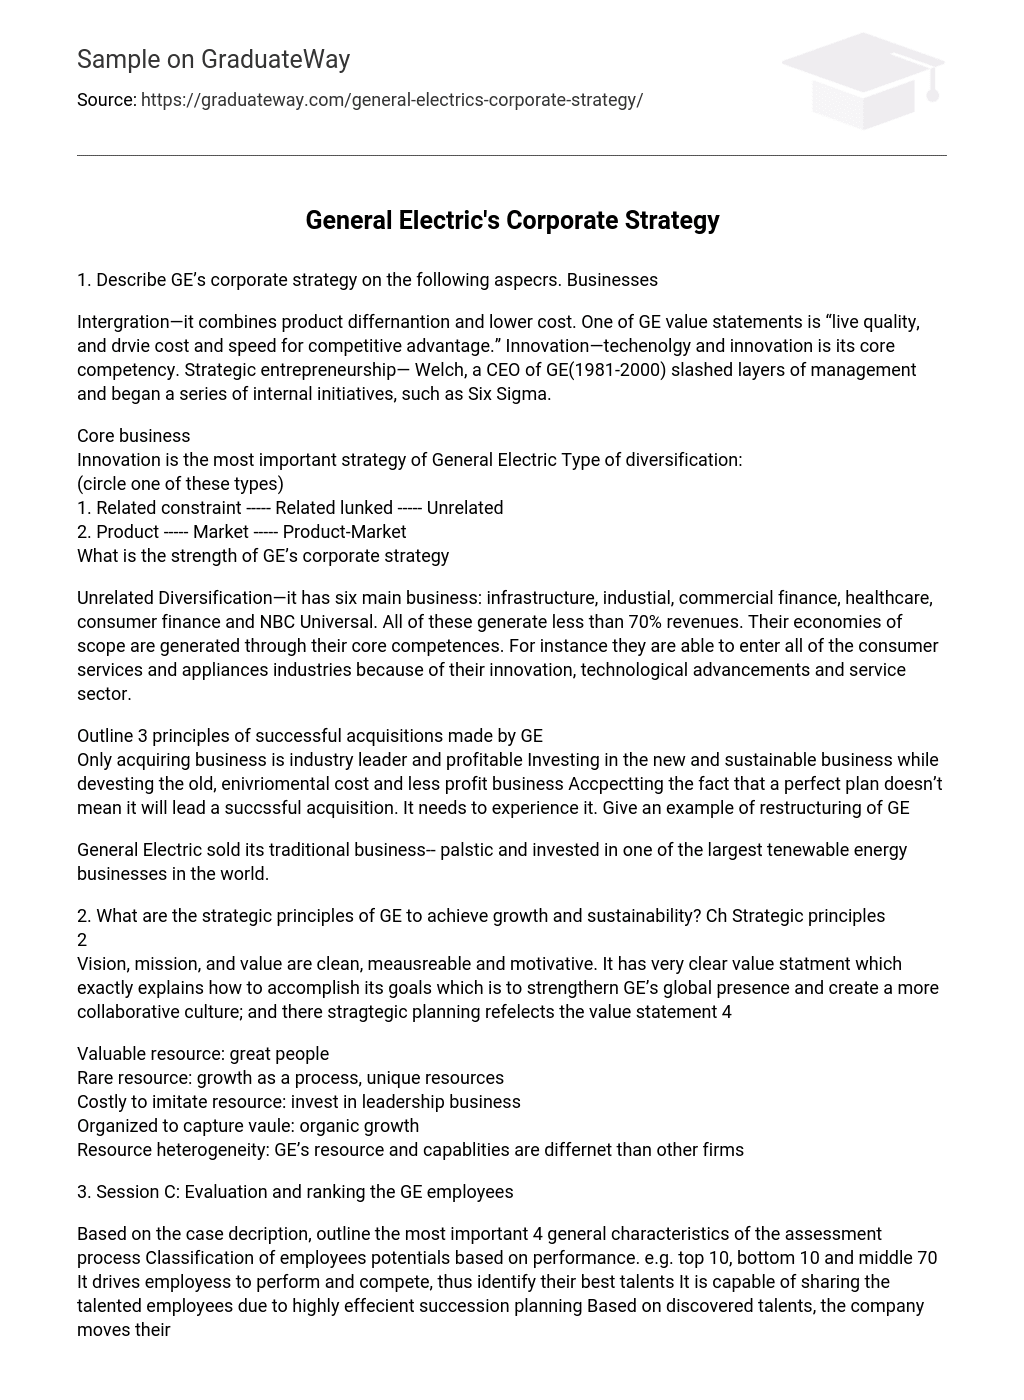 General Electric’s Corporate Strategy